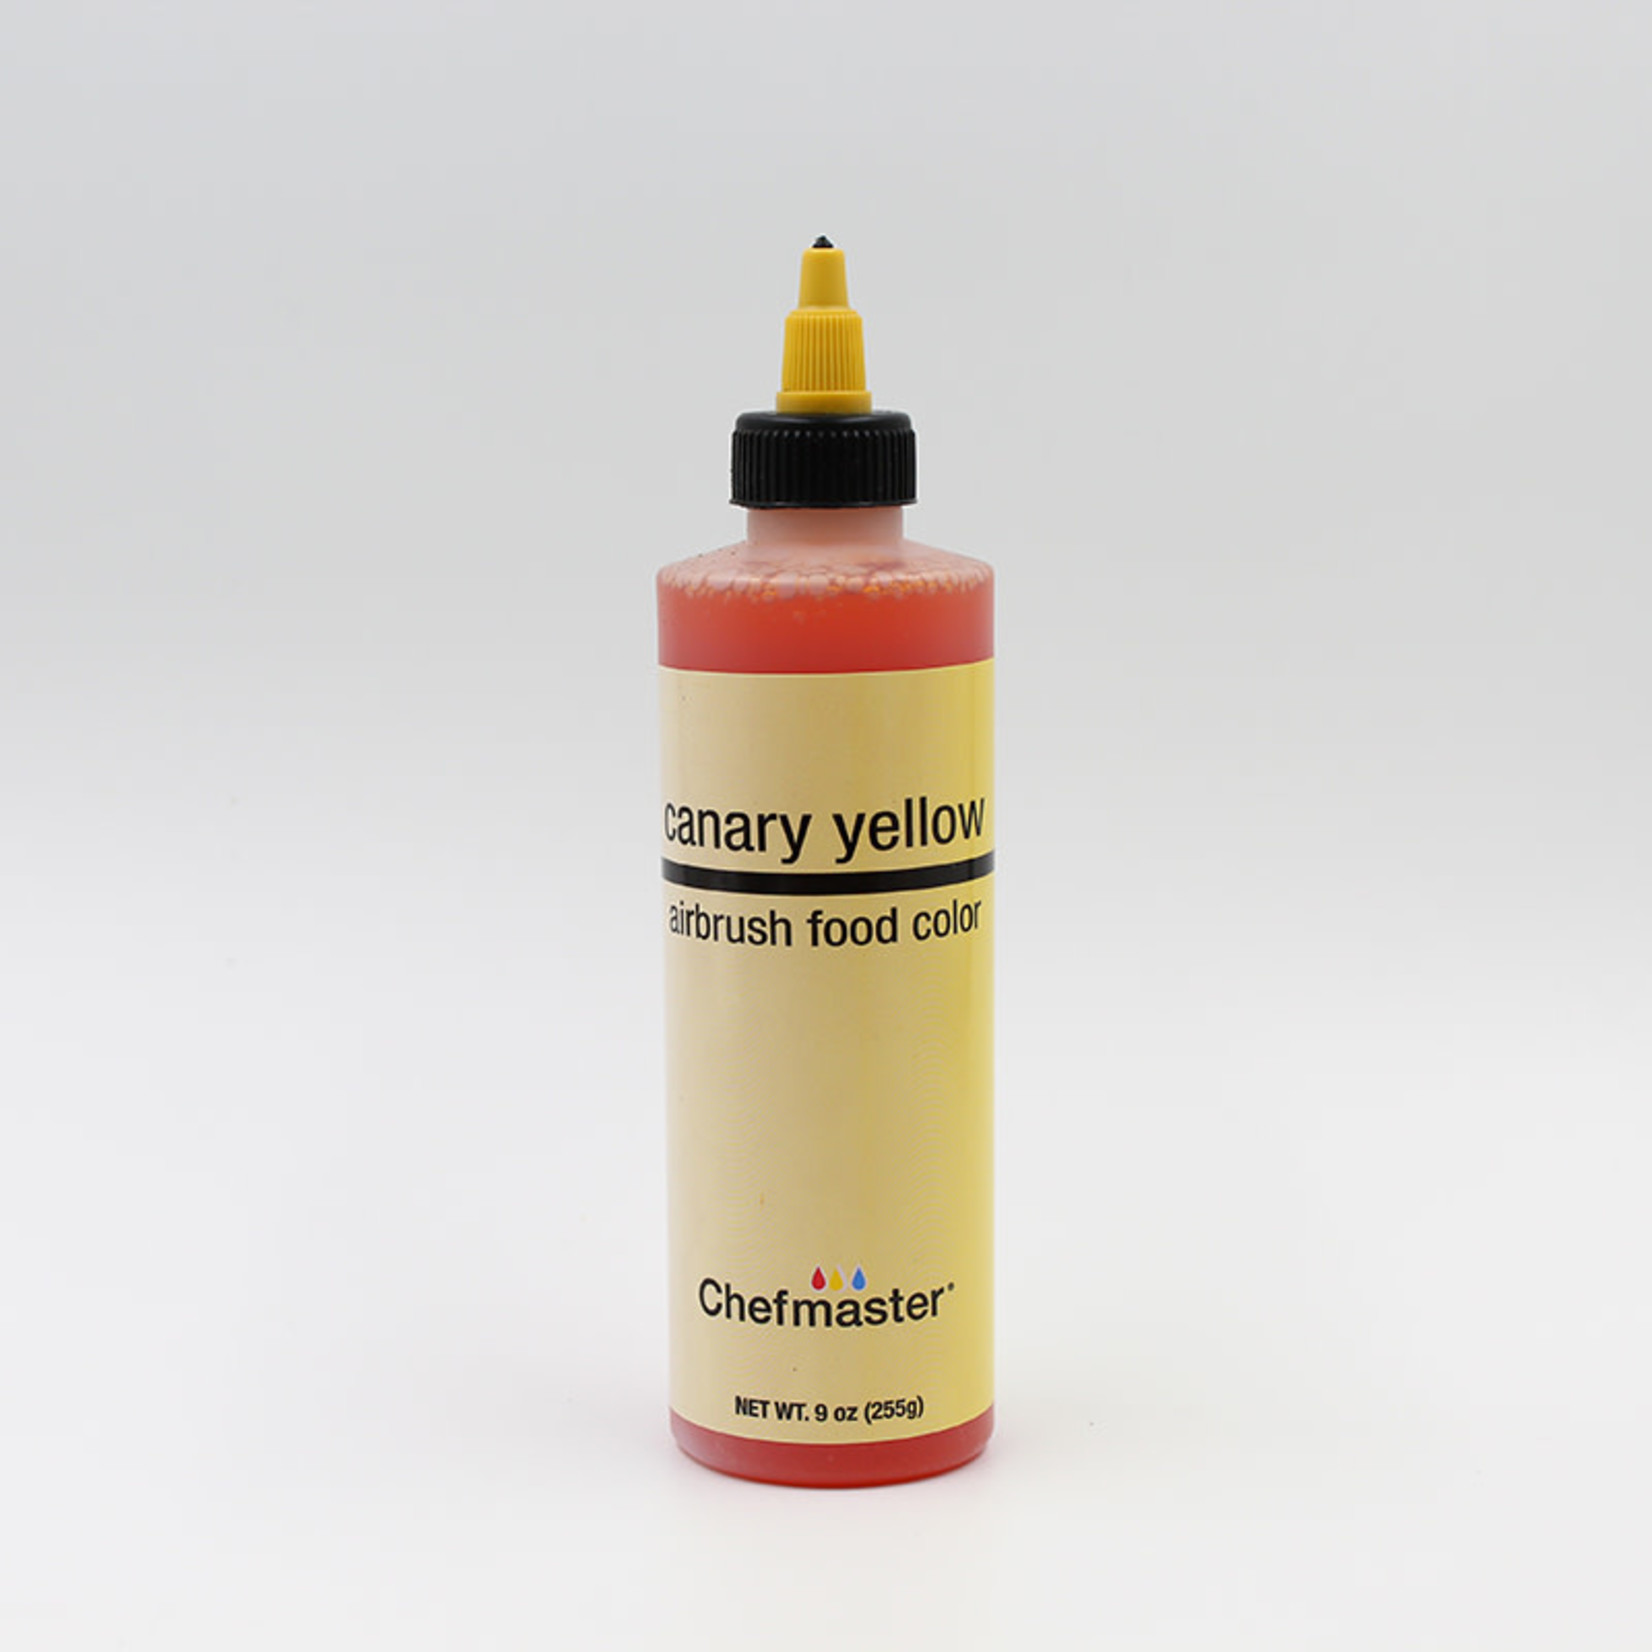 Chefmaster Chefmaster - Canary Yellow Airbrush food color - 9oz, 34-3195